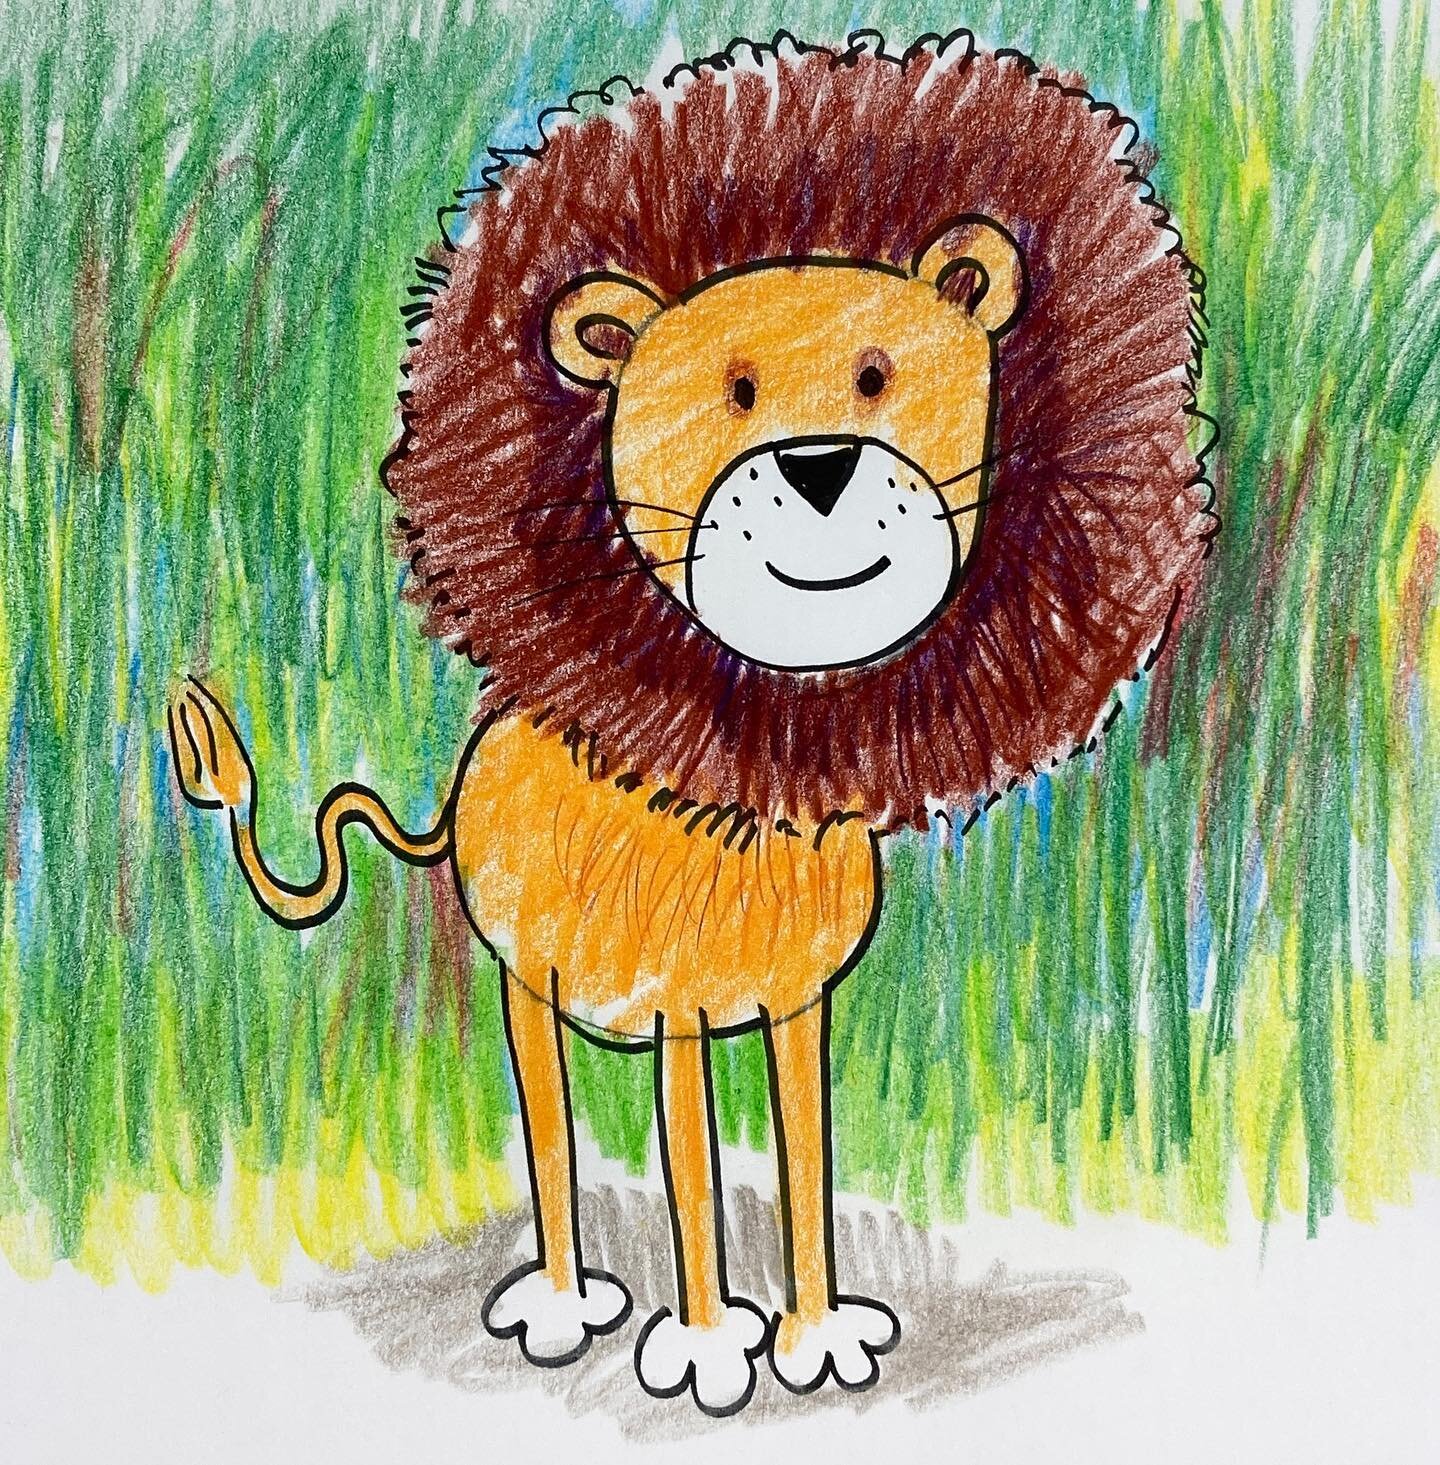 This is the colored pencil artwork Lion showed to our colored pencil students! Message us if you are interested in taking colored pencil class with us!! 😀😀😀😀

#charlotteartstudio  #parents #art #fineart #creativity #arteducation #elementaryart #c